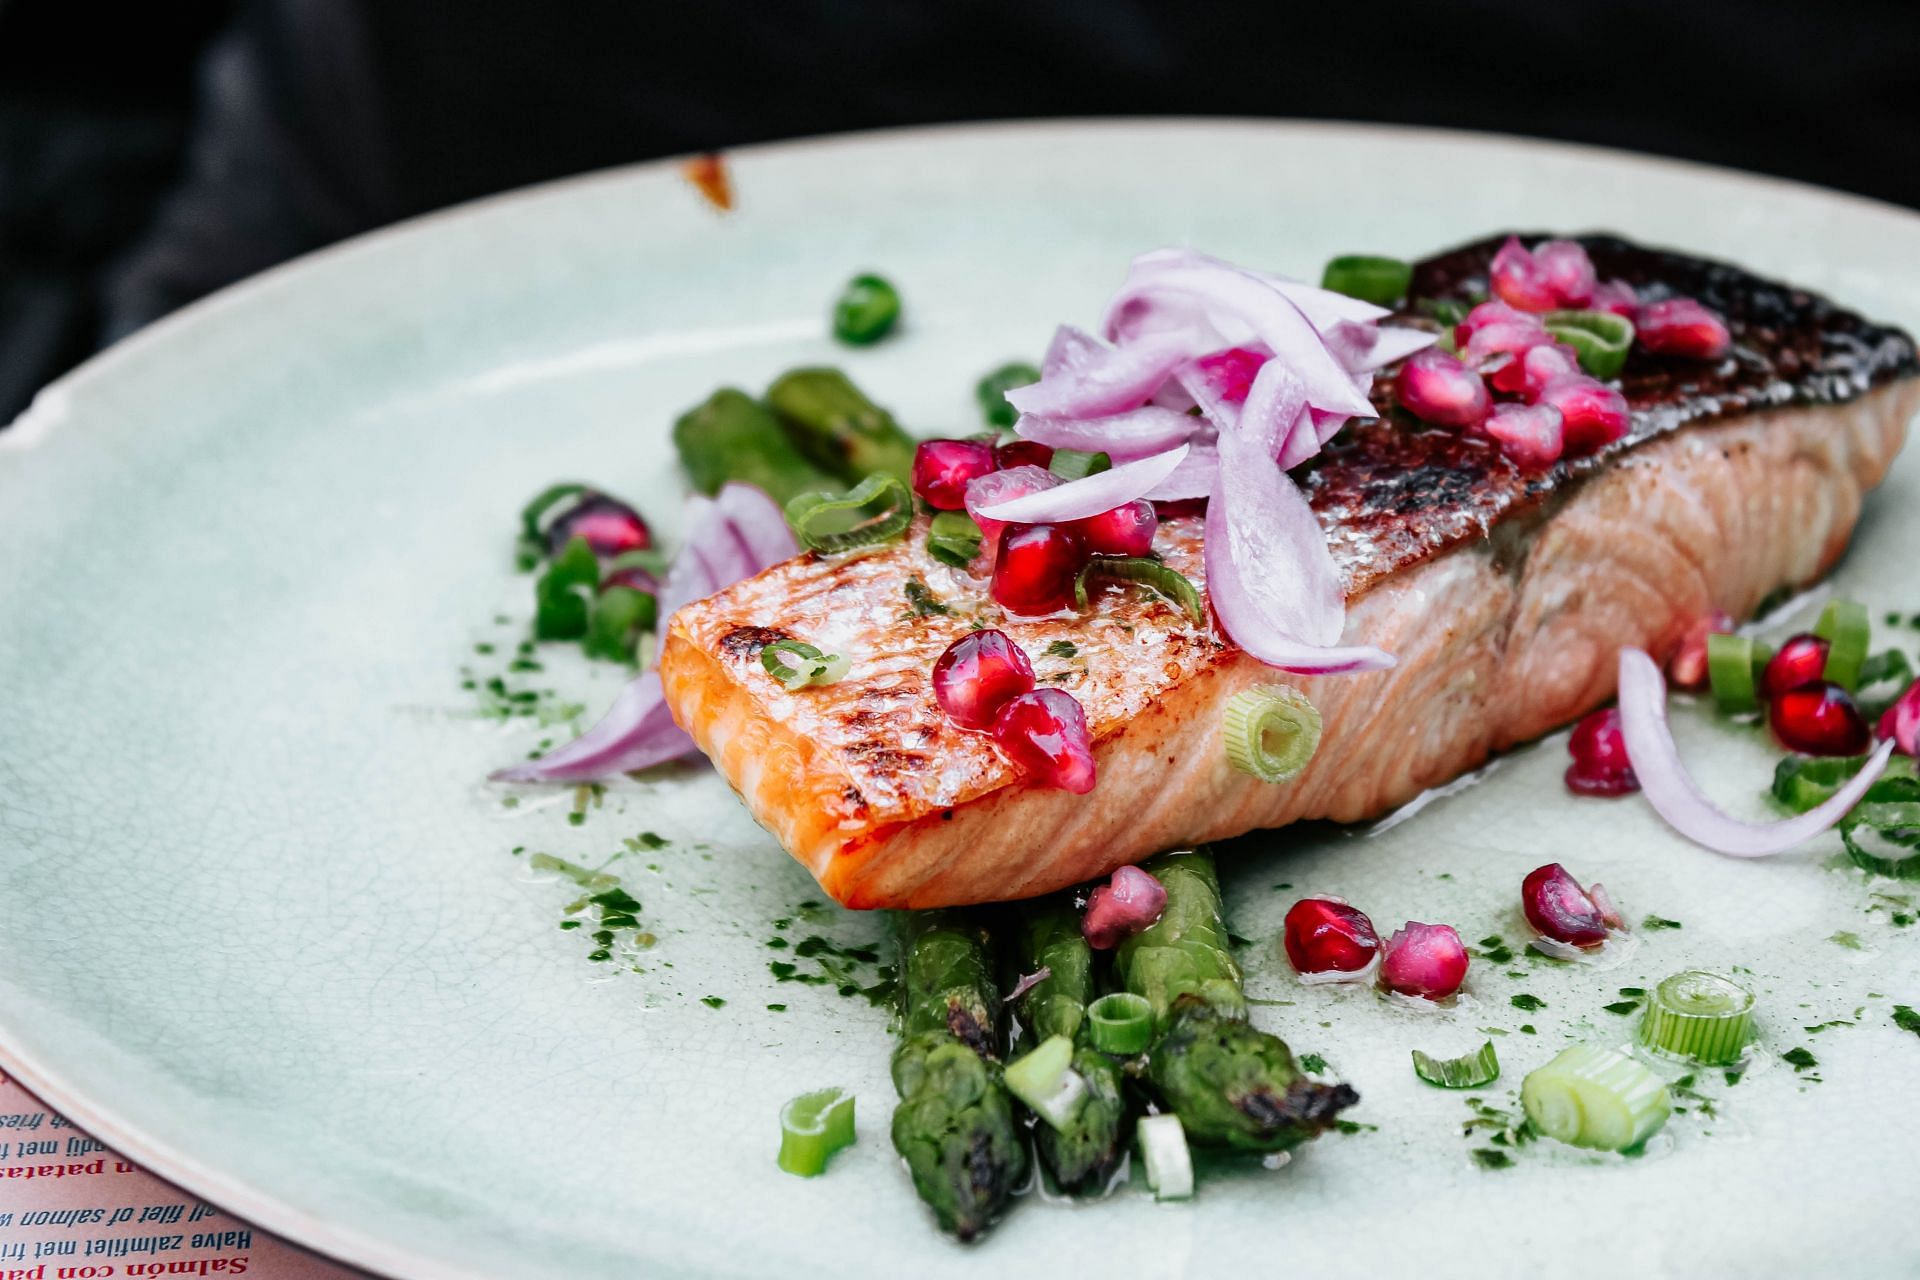 Salmon and other sources of omega-3 fatty acids are known for reducing inflammation. (Image via Unsplash/Micheile Dot Com)